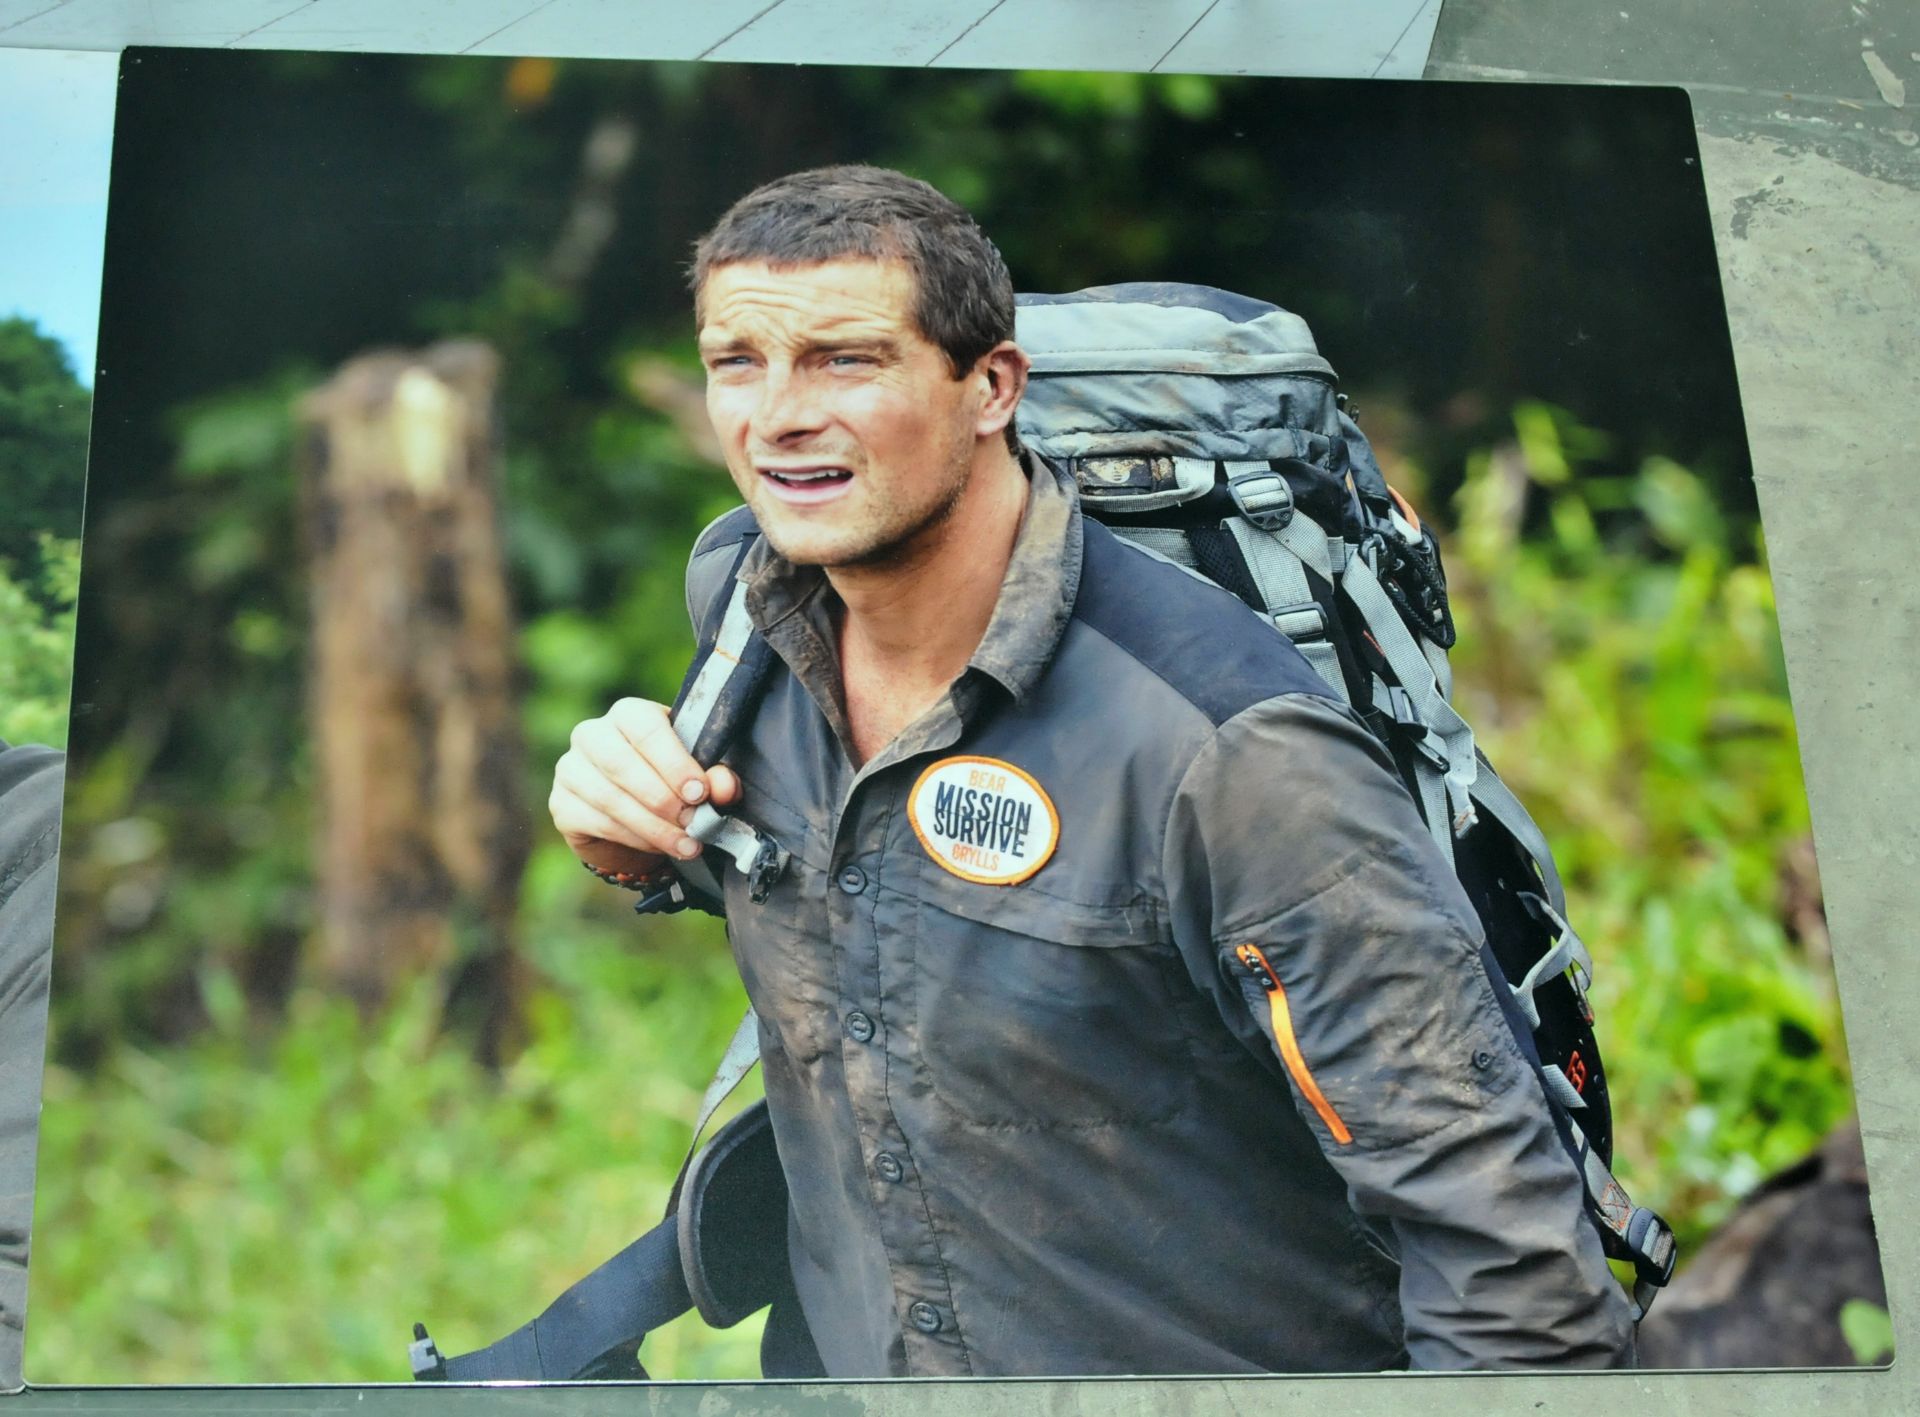 Television Network Broadcast Office Promotional Cast Photos Bear Grylls Mission Survive, Cast of ... - Image 4 of 5